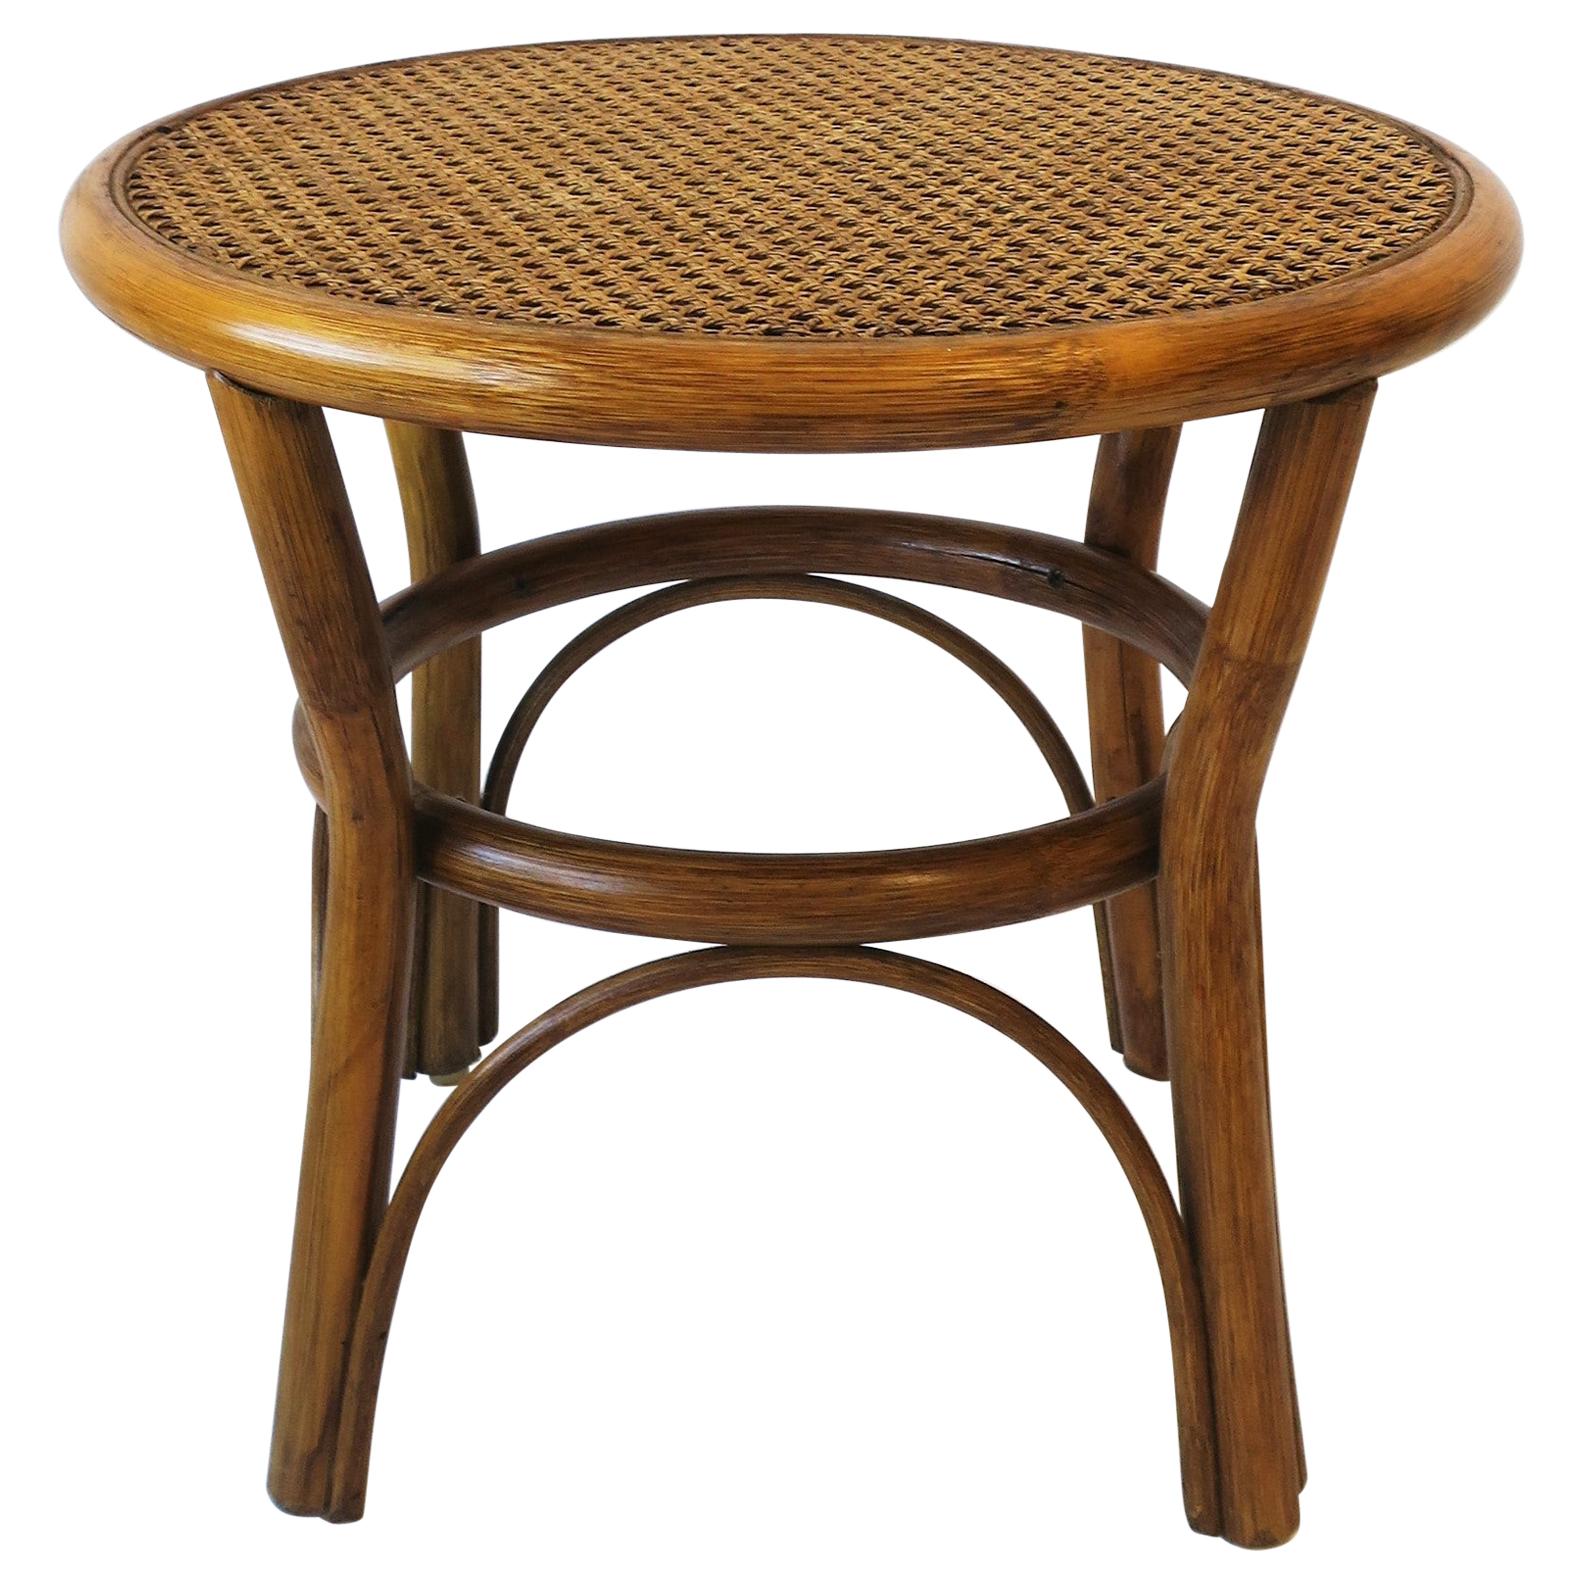 Wicker Cane Rattan Side or End Table